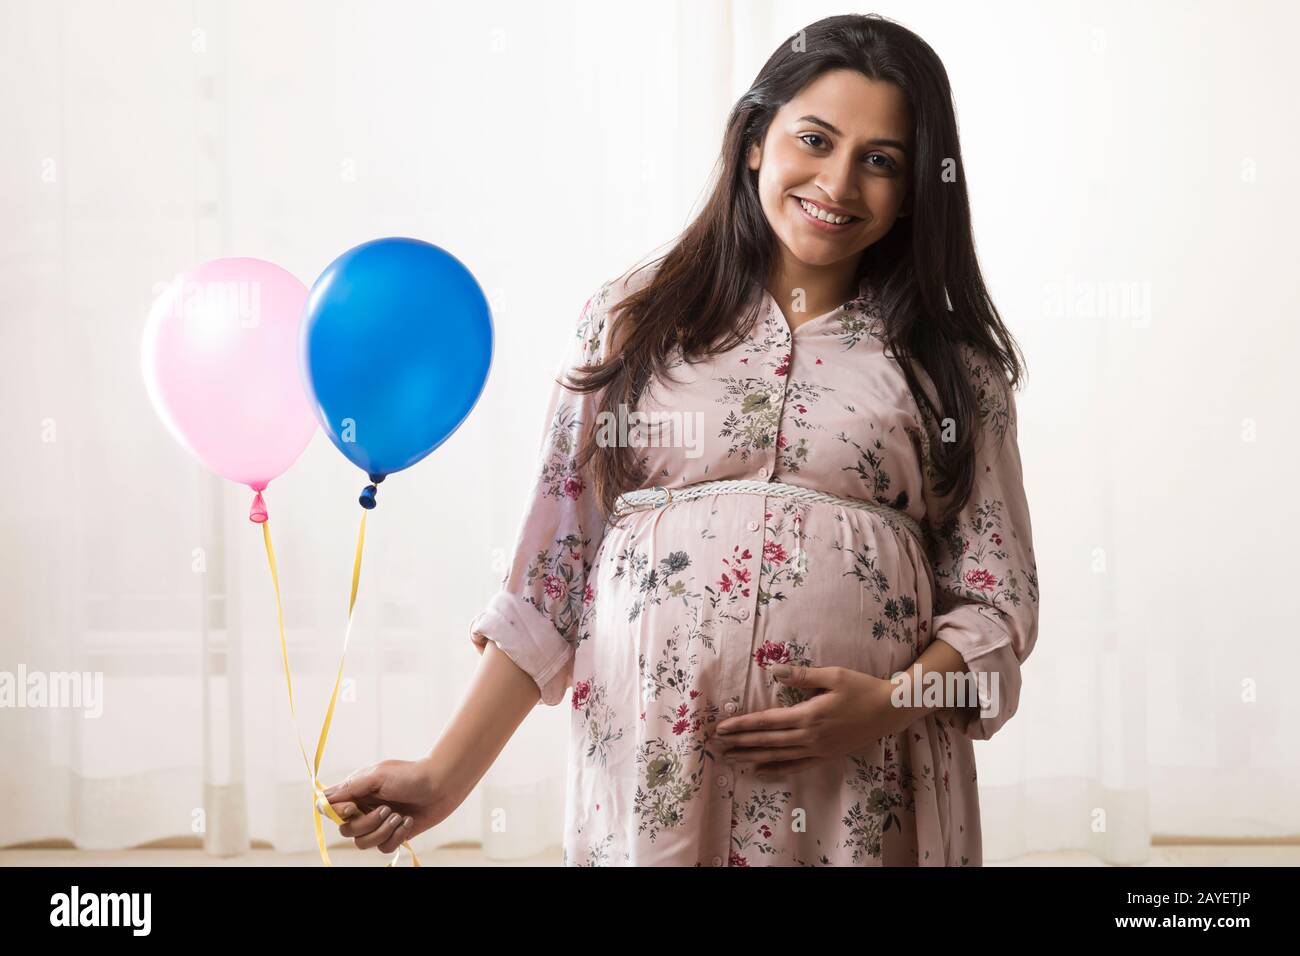 Pregnant woman holding helium balloons in hand. Stock Photo